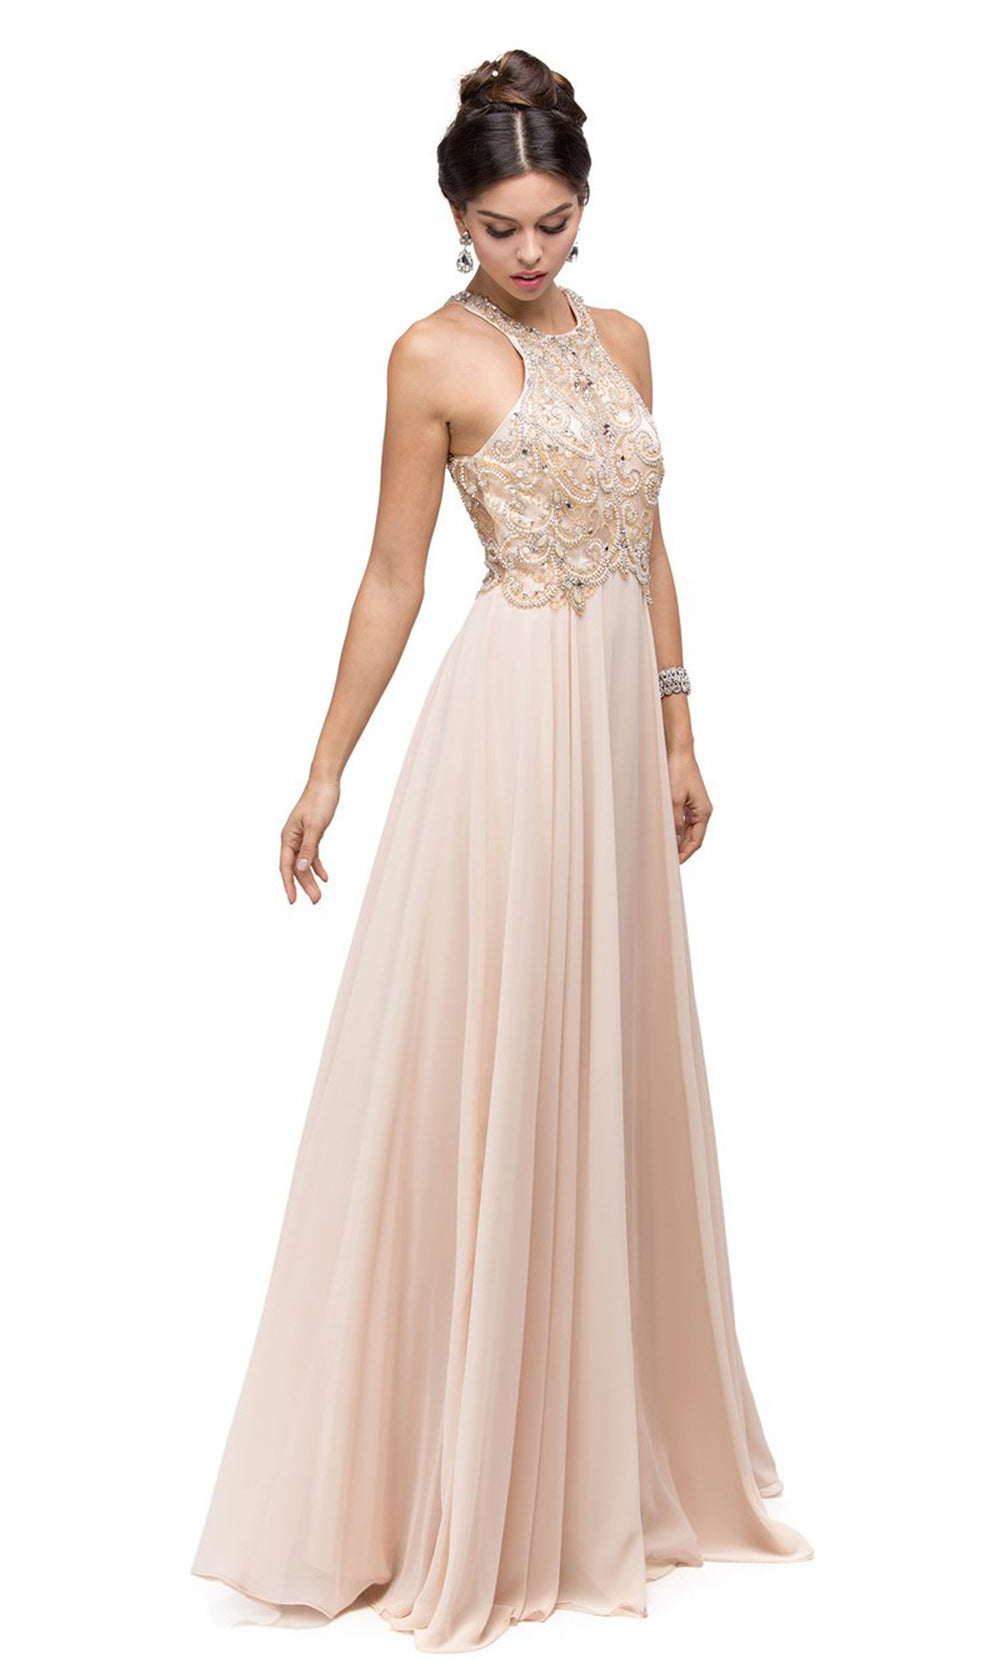 Dancing Queen - 9776 Beaded Halter Bodice A-Line Dress In Champagne & Gold